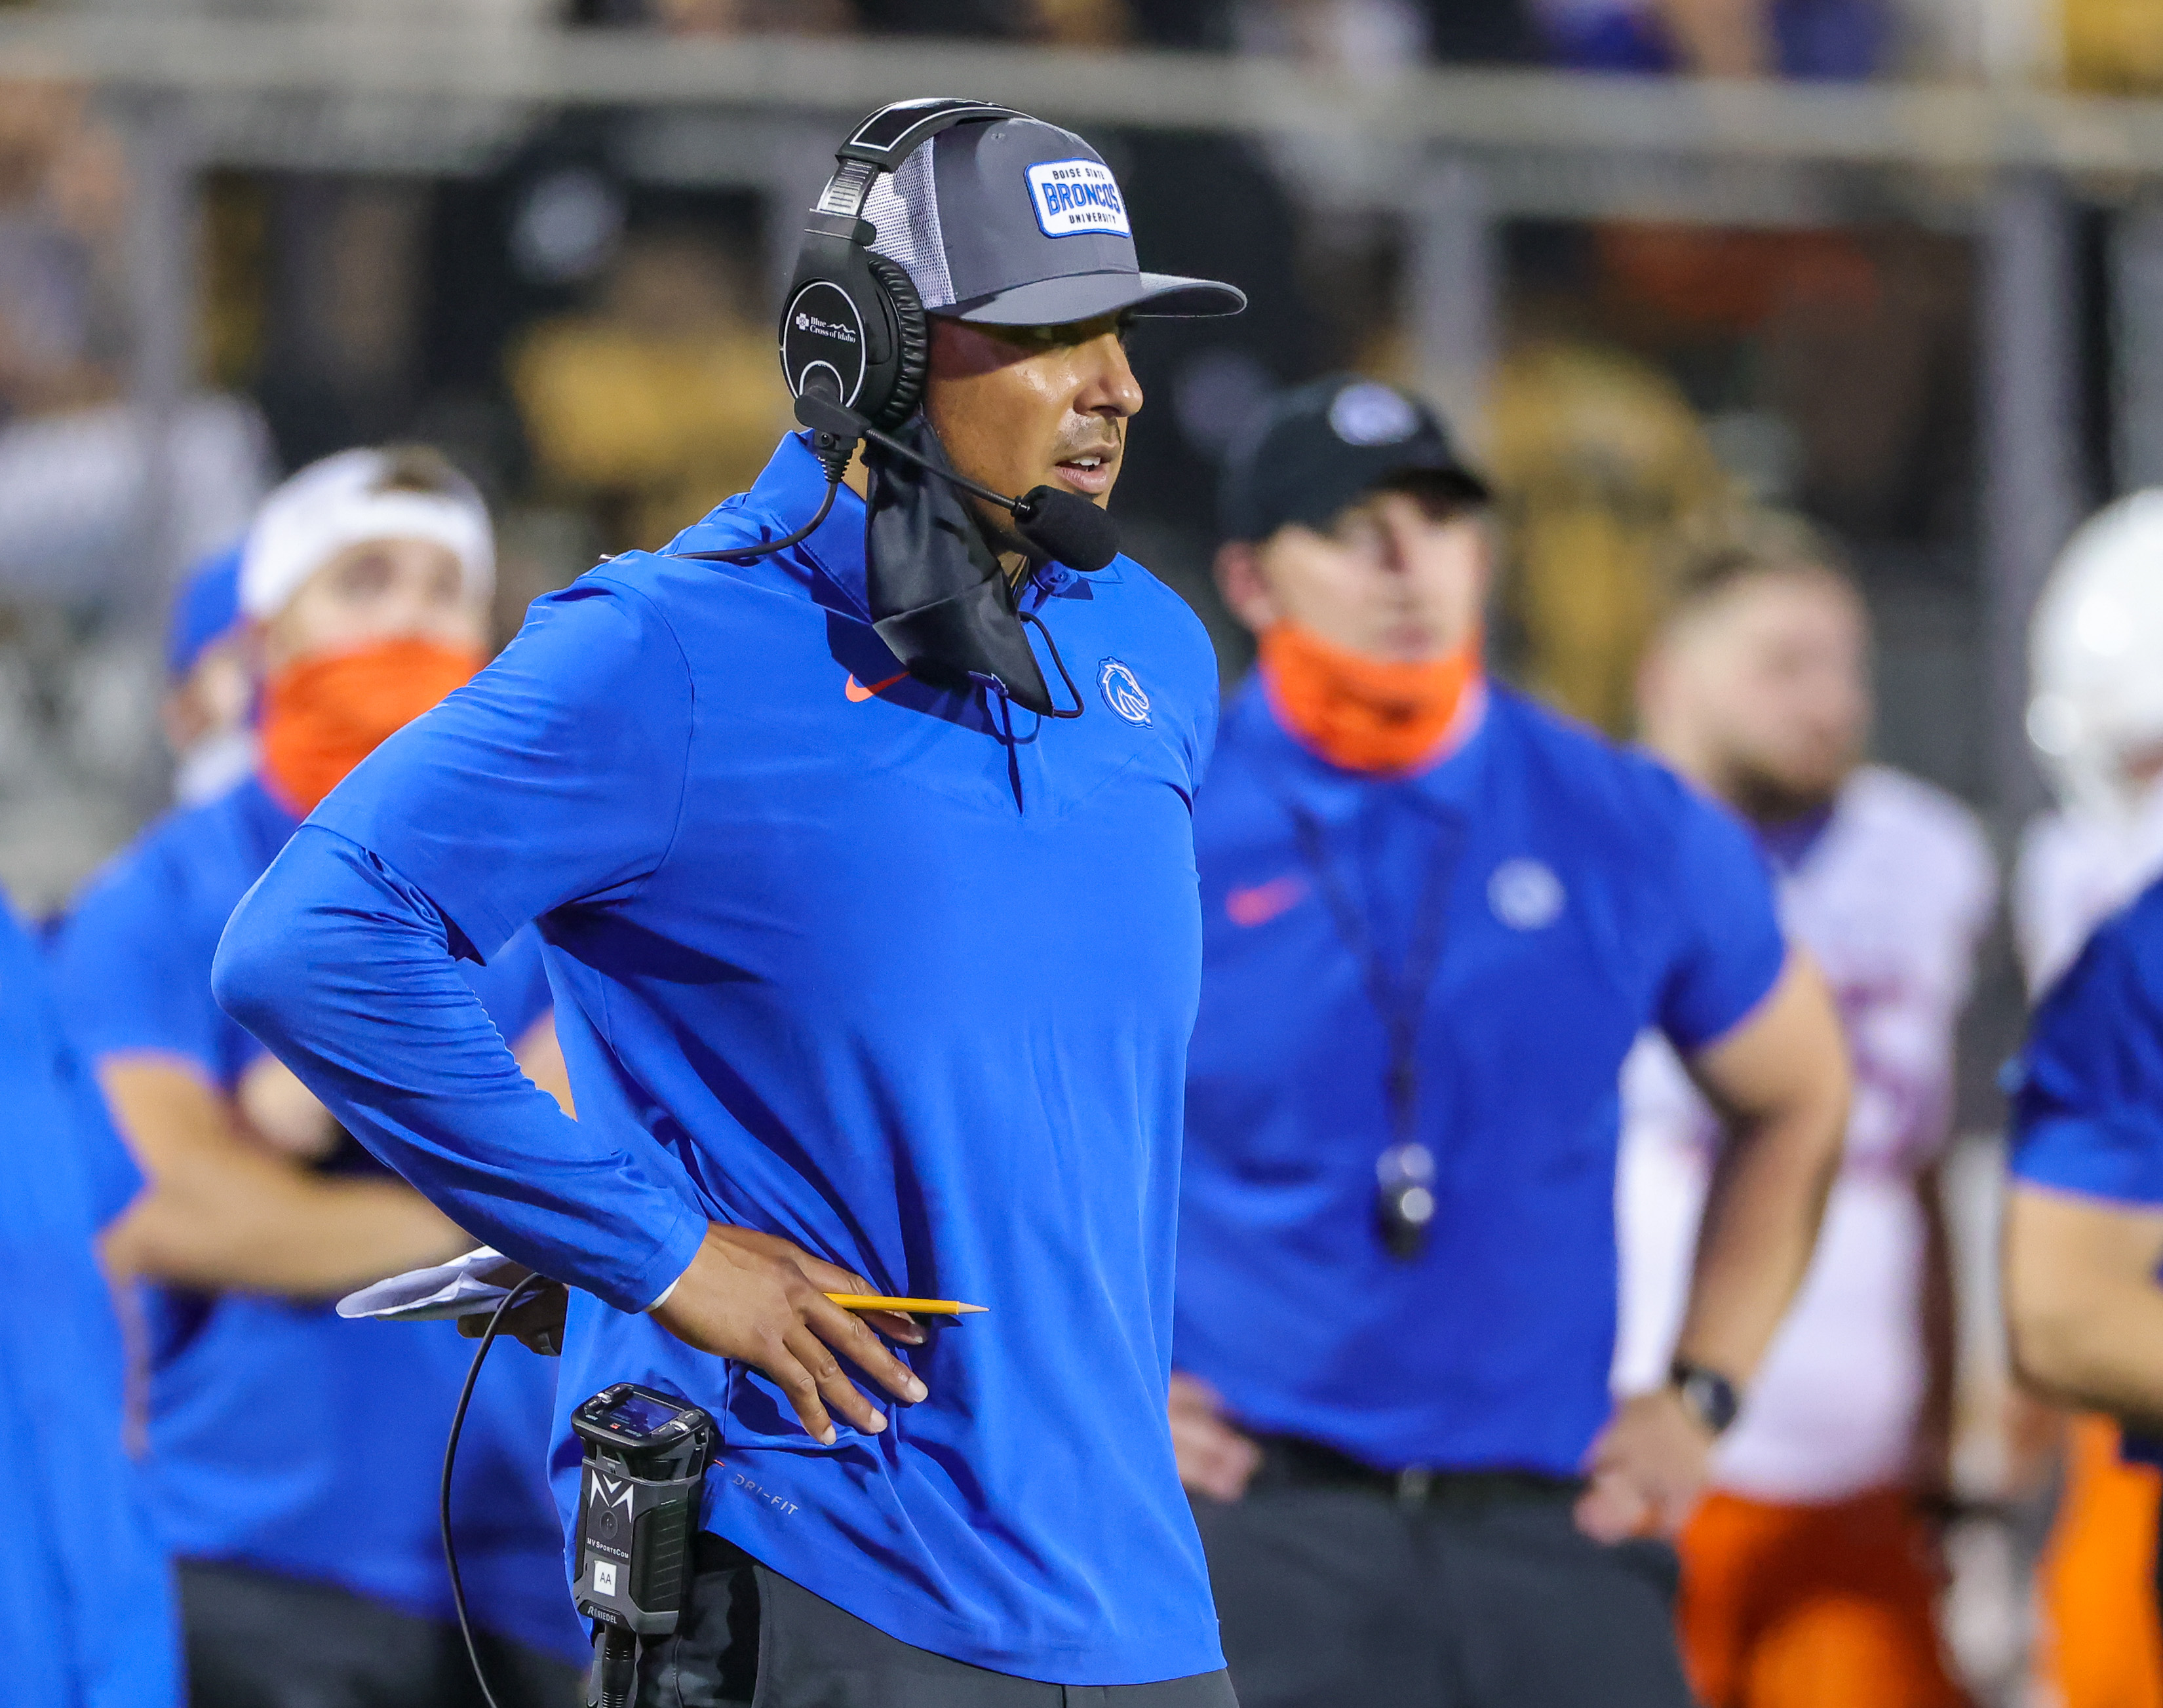 NCAA Football: Boise State at Central Florida